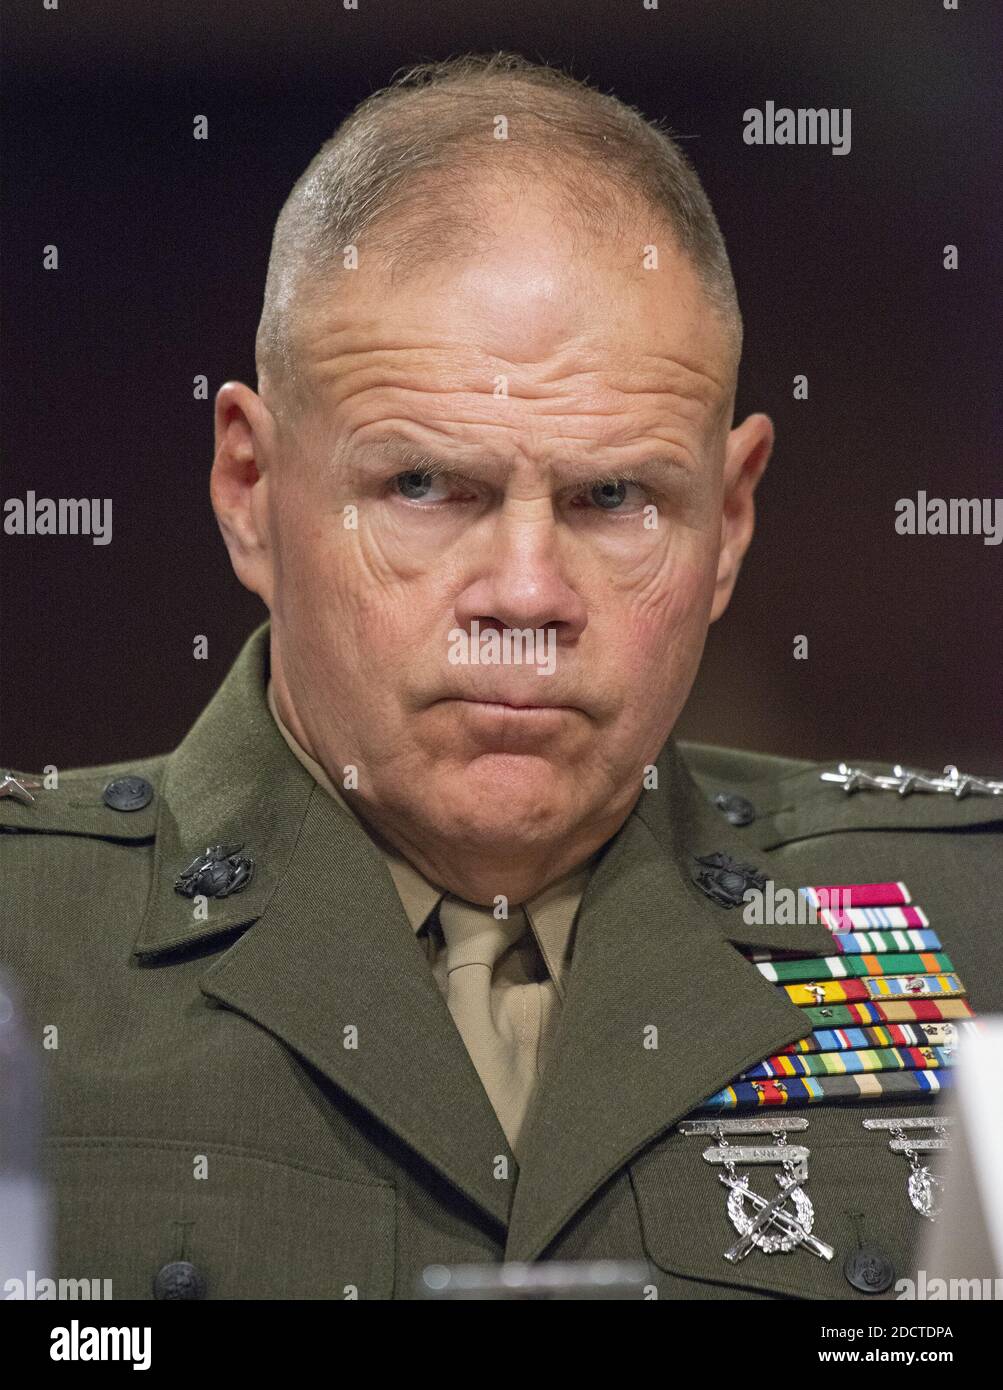 United States Marine Corps General Robert B. Neller, Commandant of the US Marine Corps, testifies before the US Senate Committee on Armed Services 'on the posture of the Department of the Navy in review of the Defense Authorization Request for Fiscal Year 2019 and the Future Years Defense Program' on Thursday, April 19, 2018. Washington, DC, USA. Photo by Ron Sachs / CNP/ABACAPRESS.COM Stock Photo